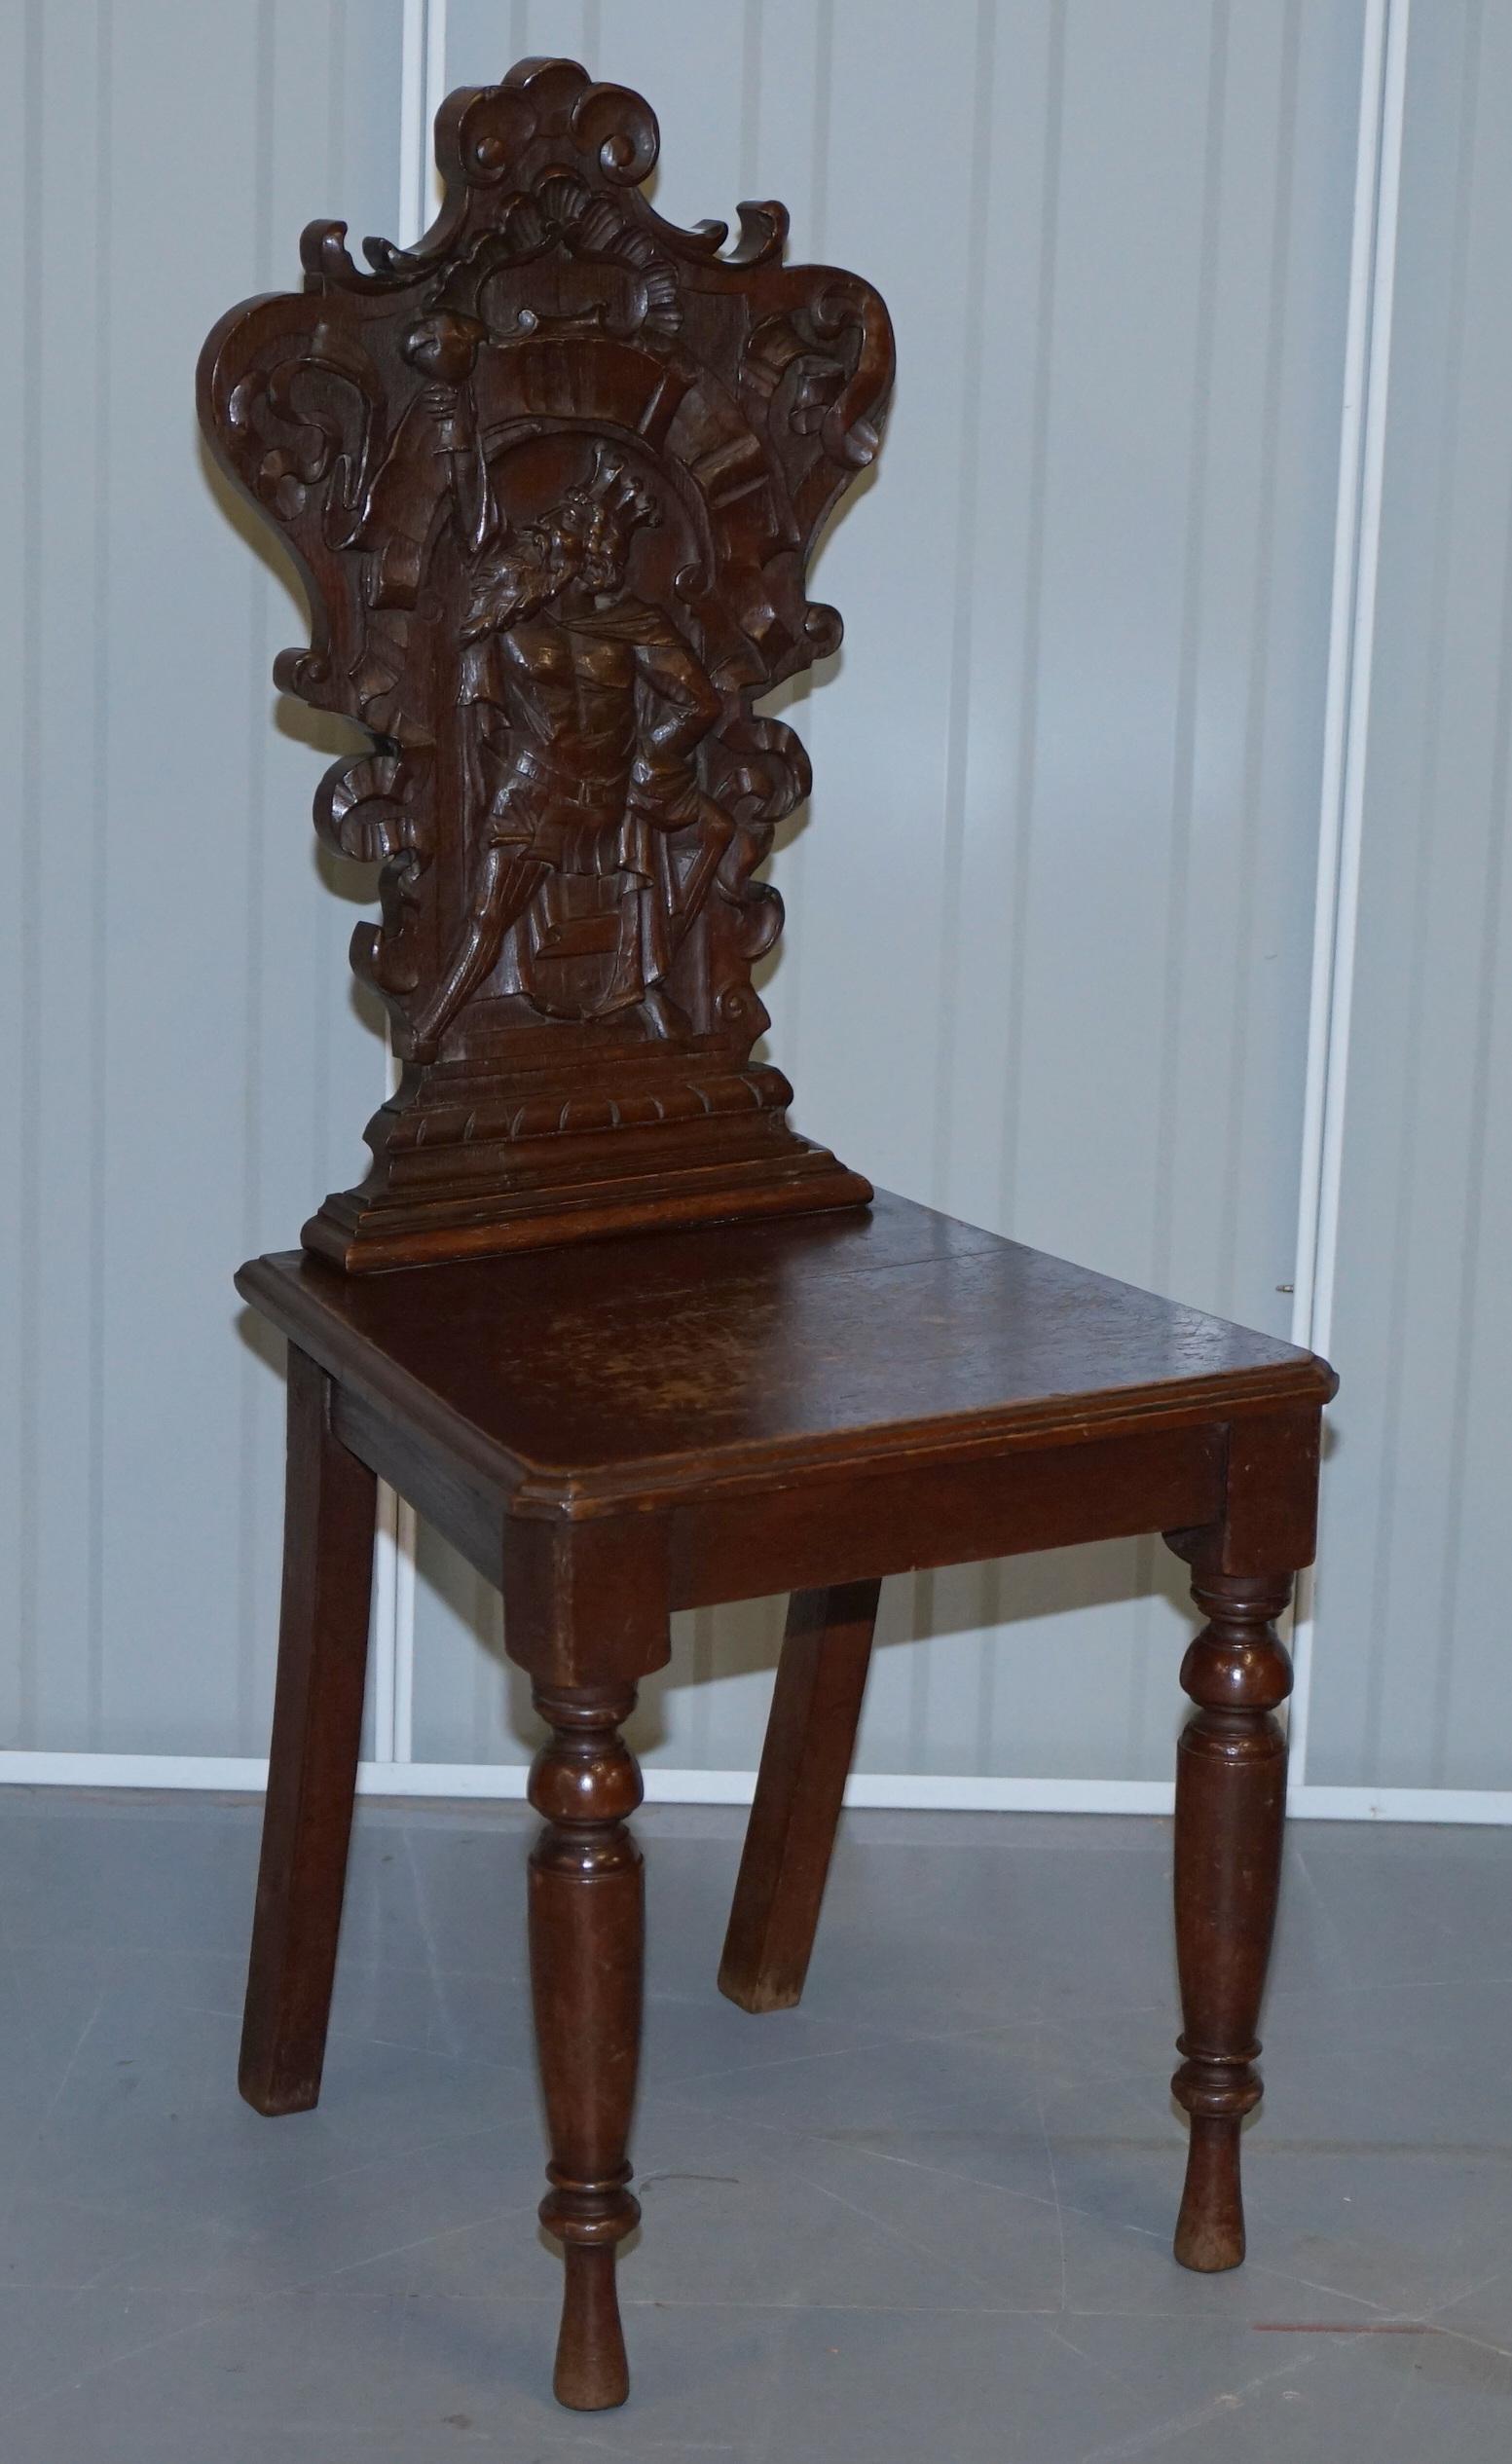 Wimbledon-Furniture

Wimbledon-Furniture is delighted to offer for sale this absolutely stunning vintage English Oak hand carved hall chair depicting a King and gentleman knight

Please note the delivery fee listed is just a guide, it covers